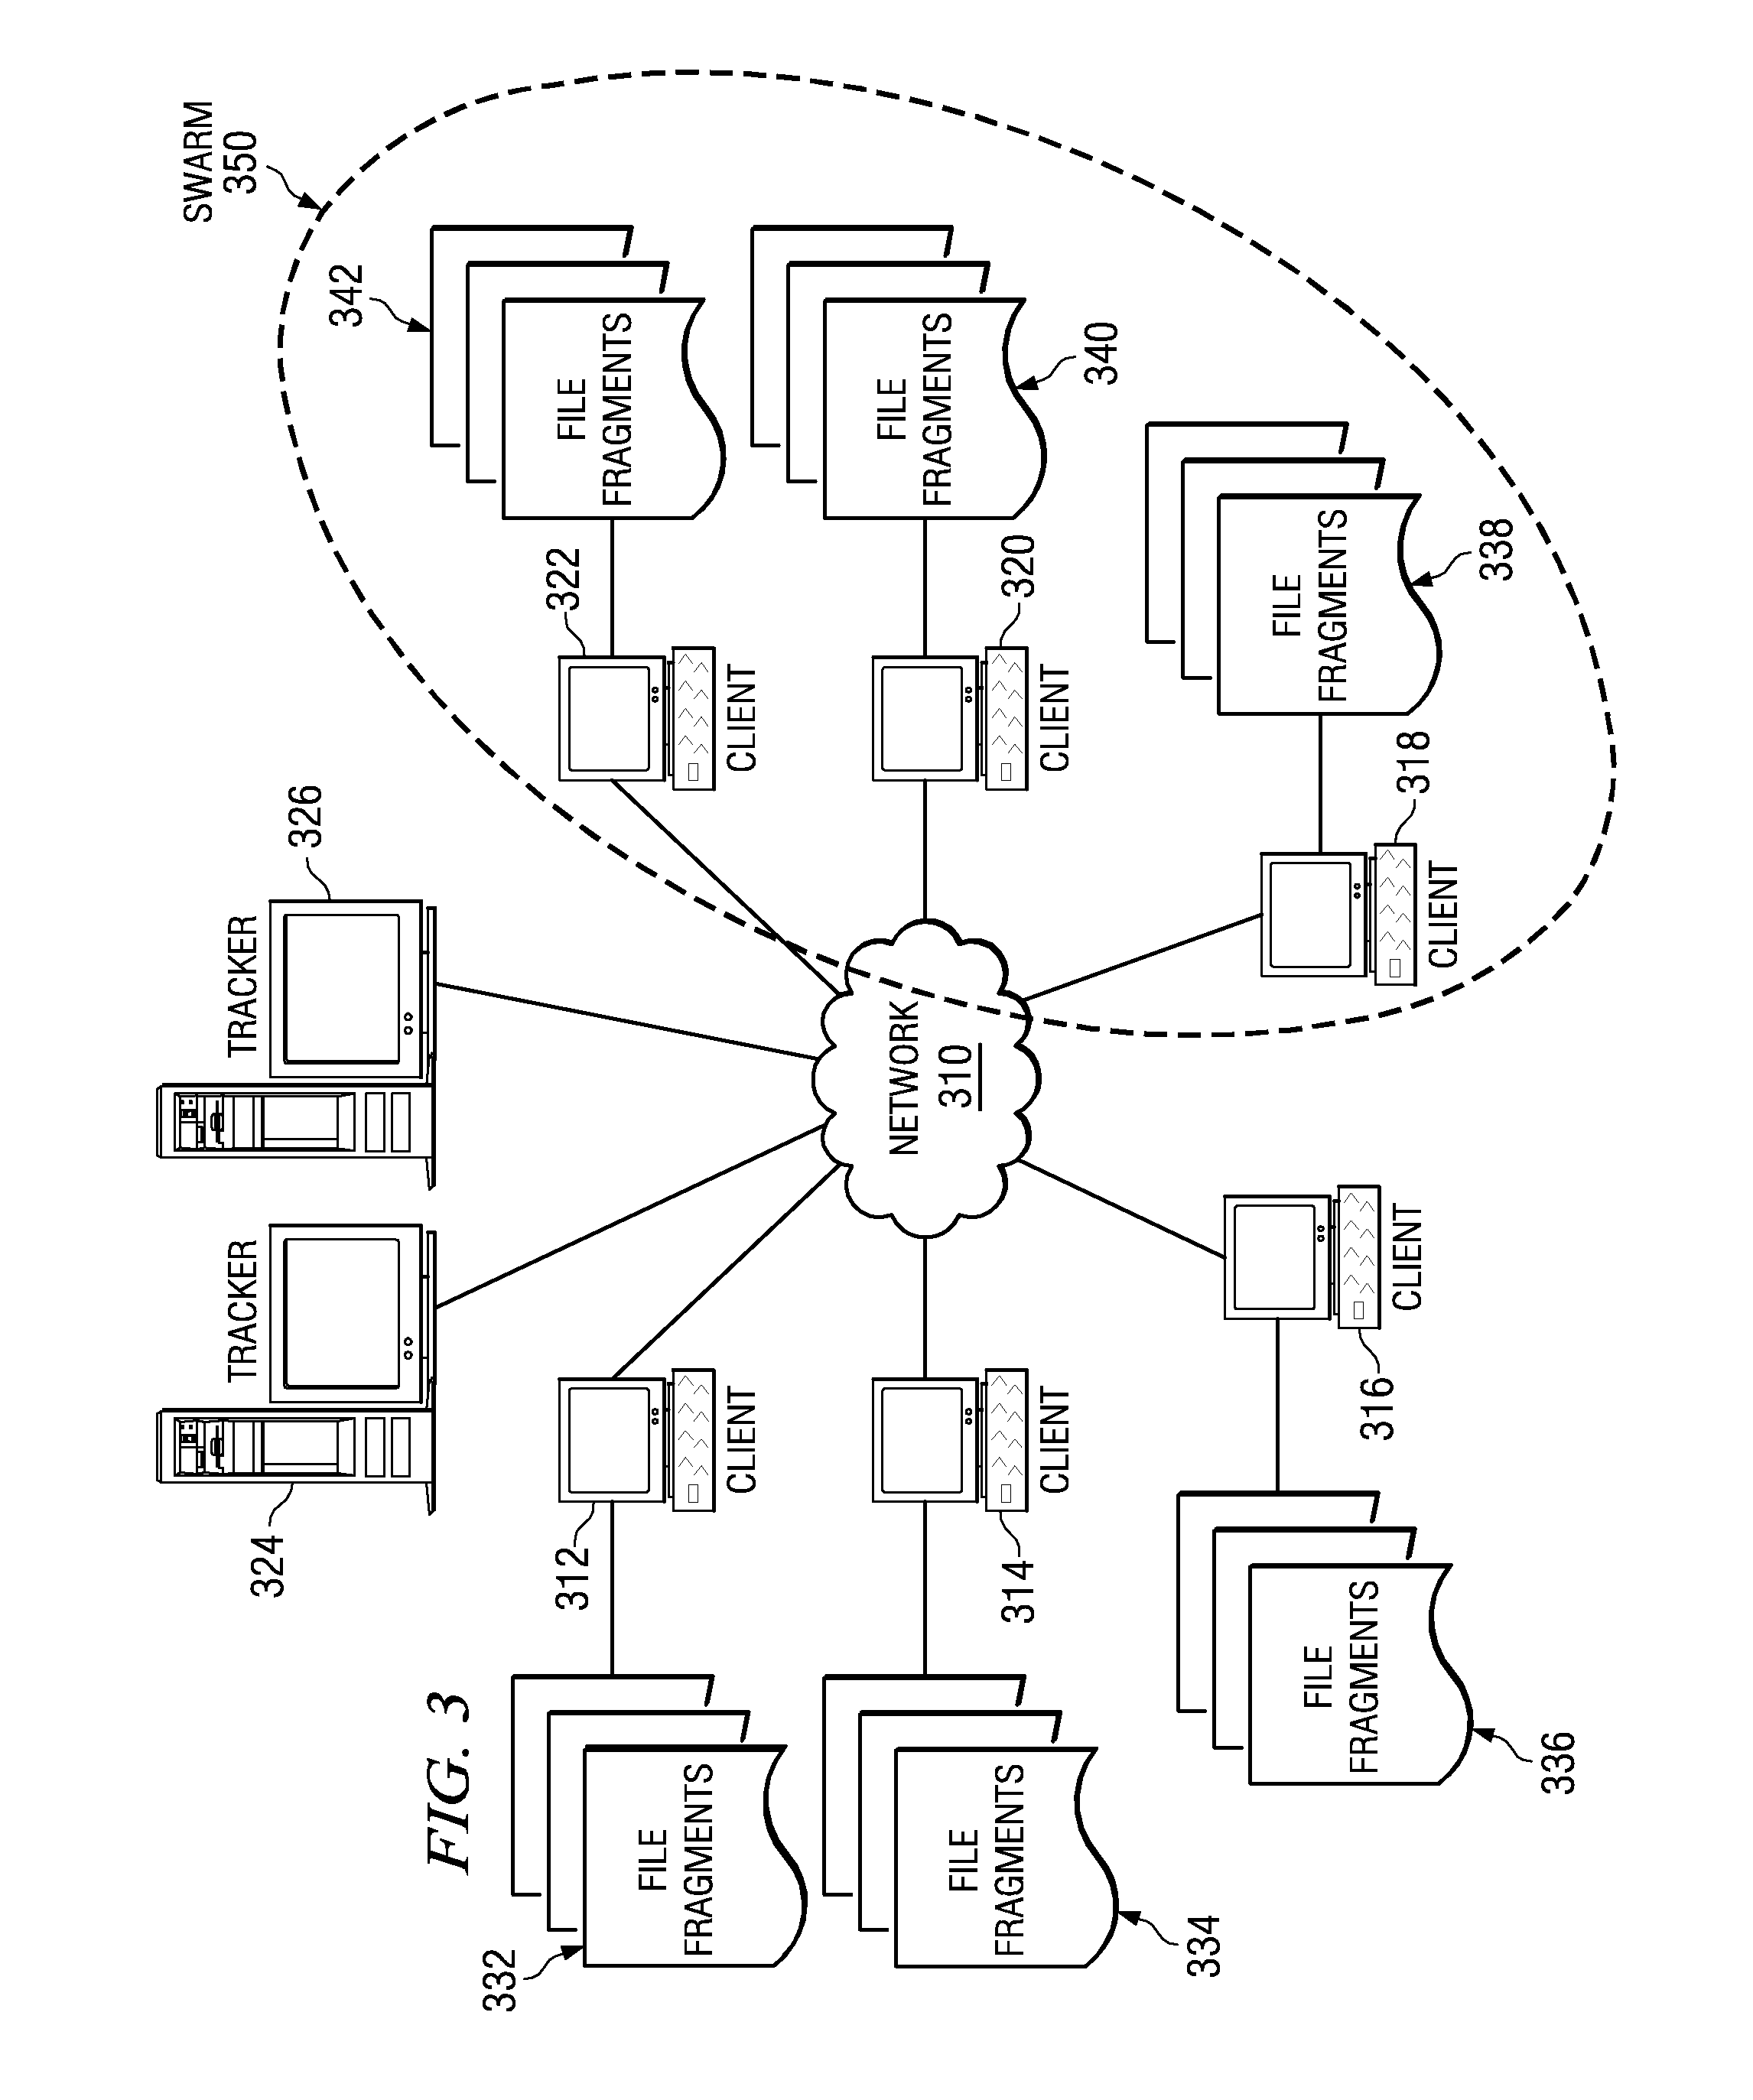 Background file sharing in a segmented peer-to-peer file sharing network